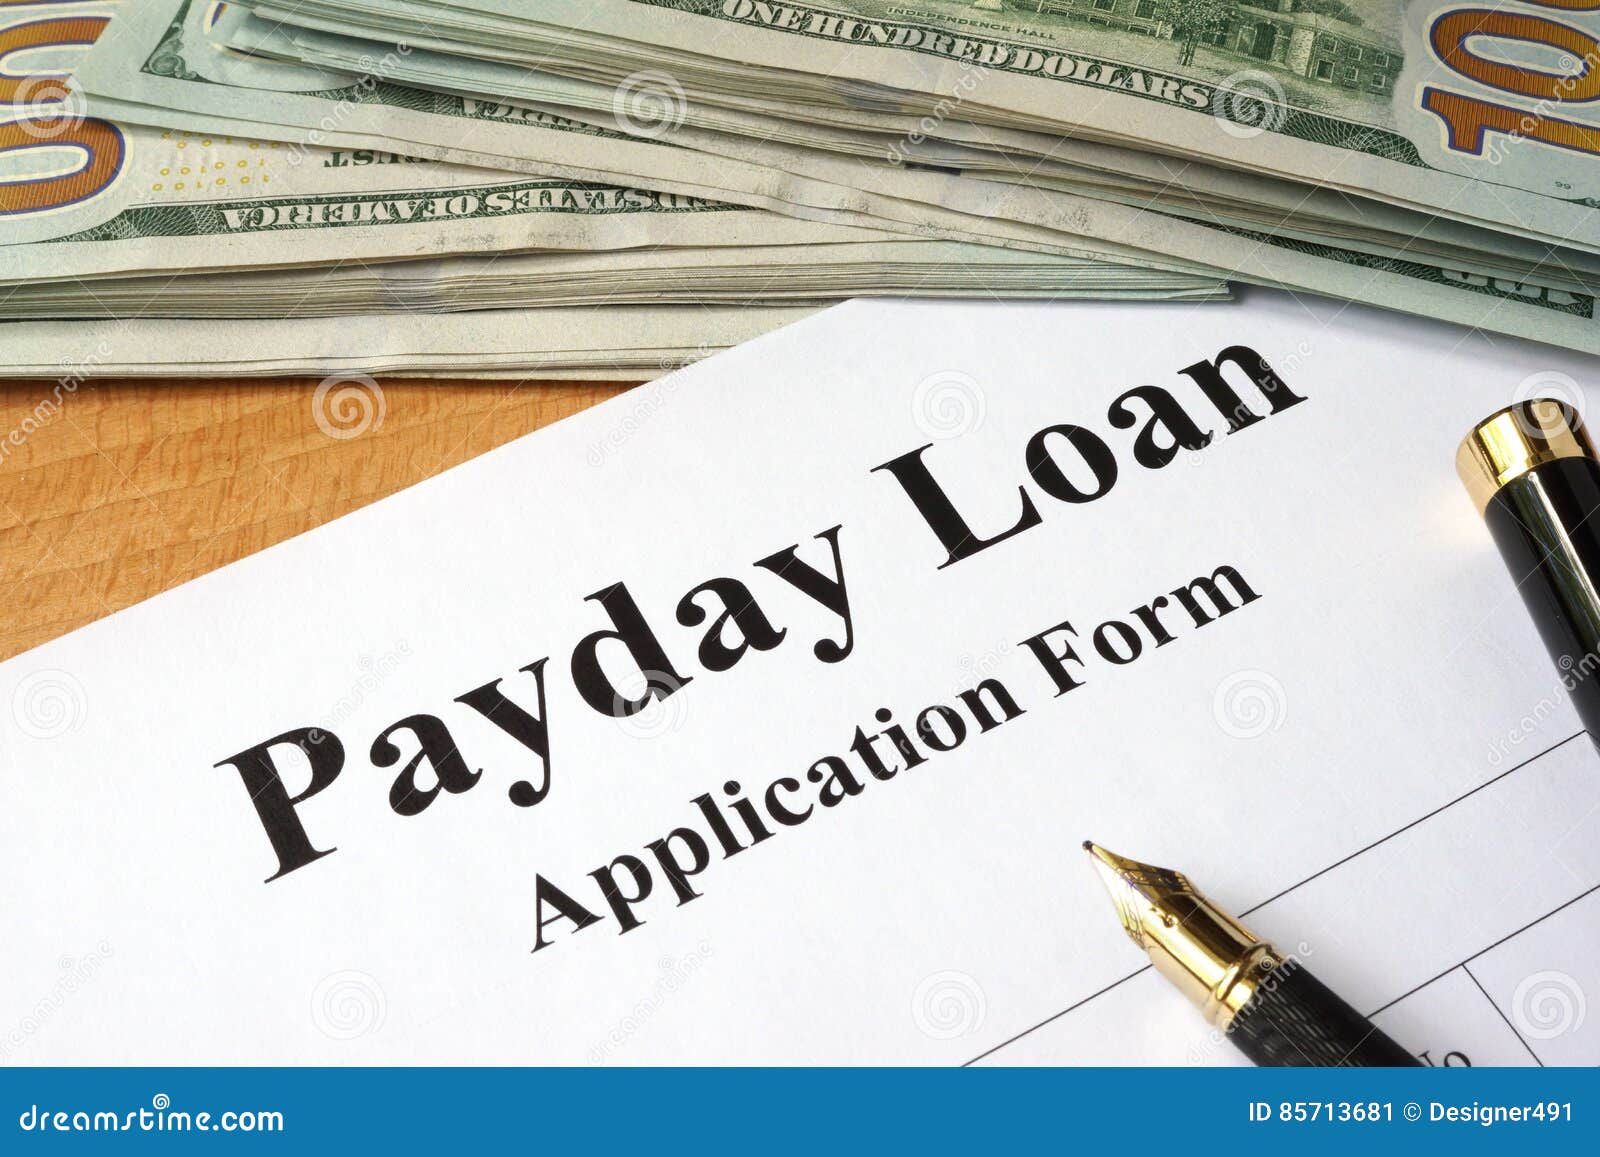 payday loan form.